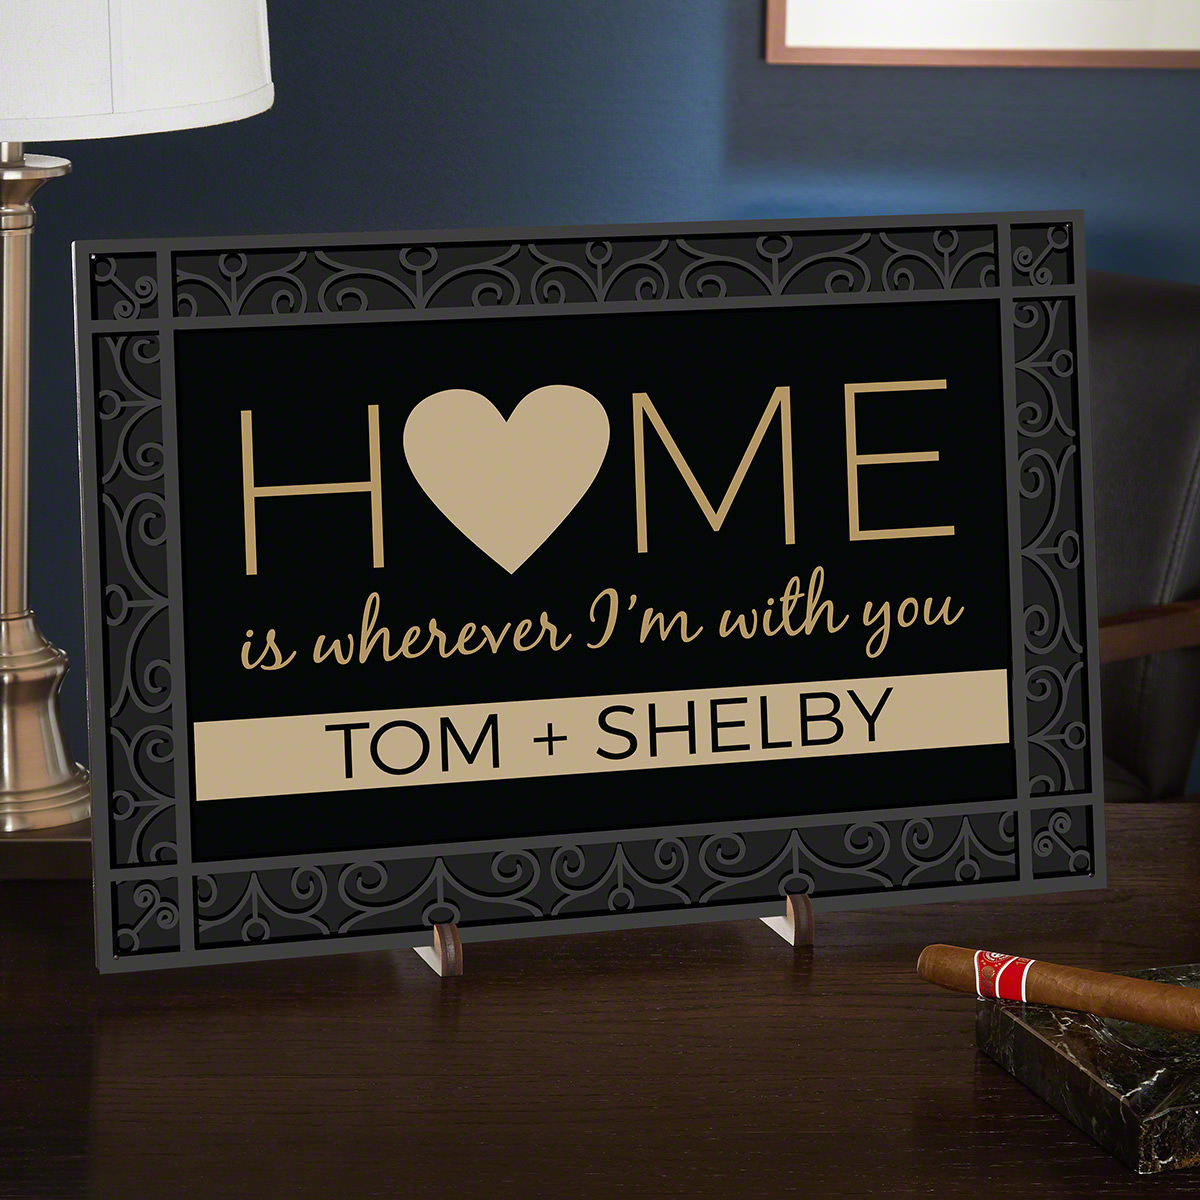 Youâ€™ve heard time and again that home is where your heart is, and your heart is always with the one you love. We created this personalized home decor sign that perfectly captures the way you feel about the love of your life. You can even customize the l #home 